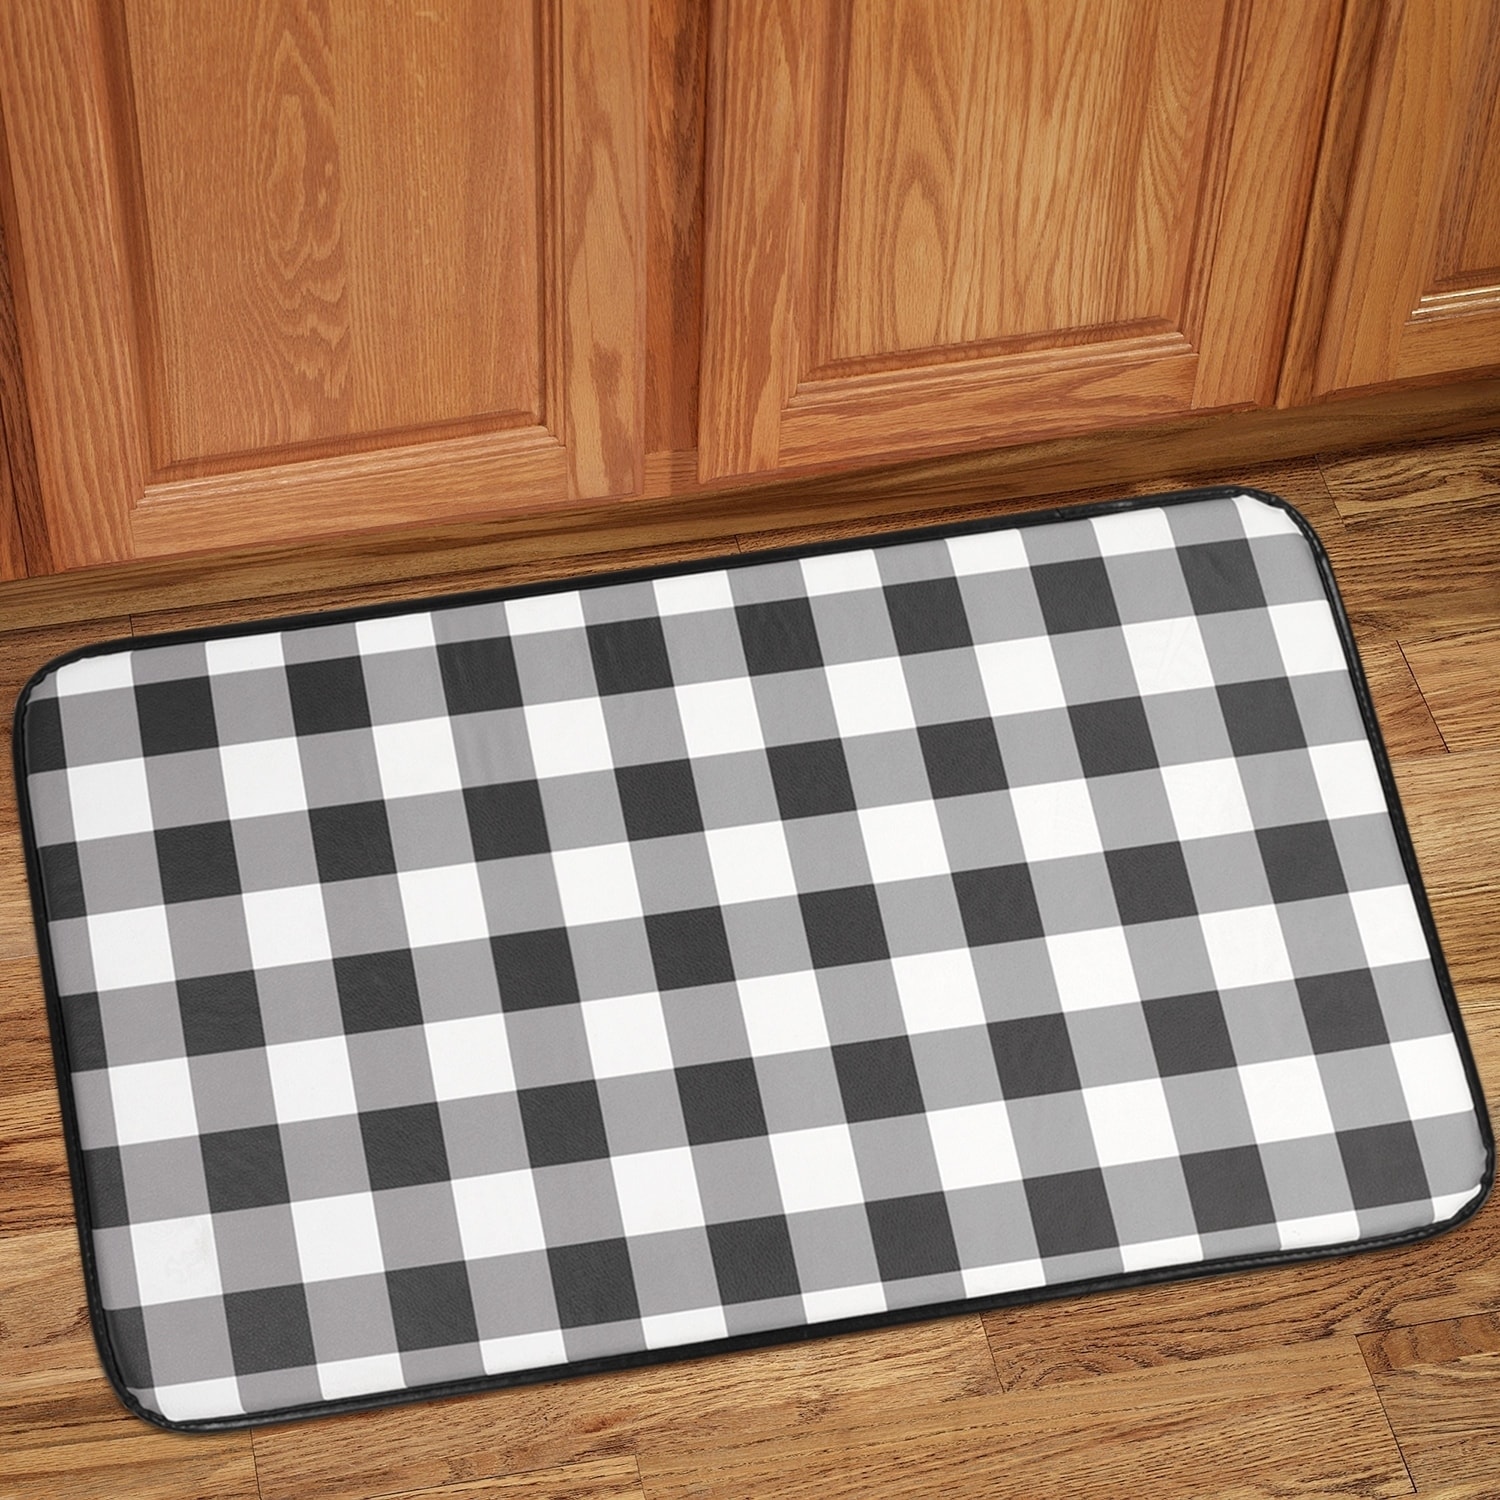 Shop Black Friday Deals On Buffalo Check Printed Anti Fatigue Kitchen Mat 18x30 Black White 18x30 Overstock 19977635